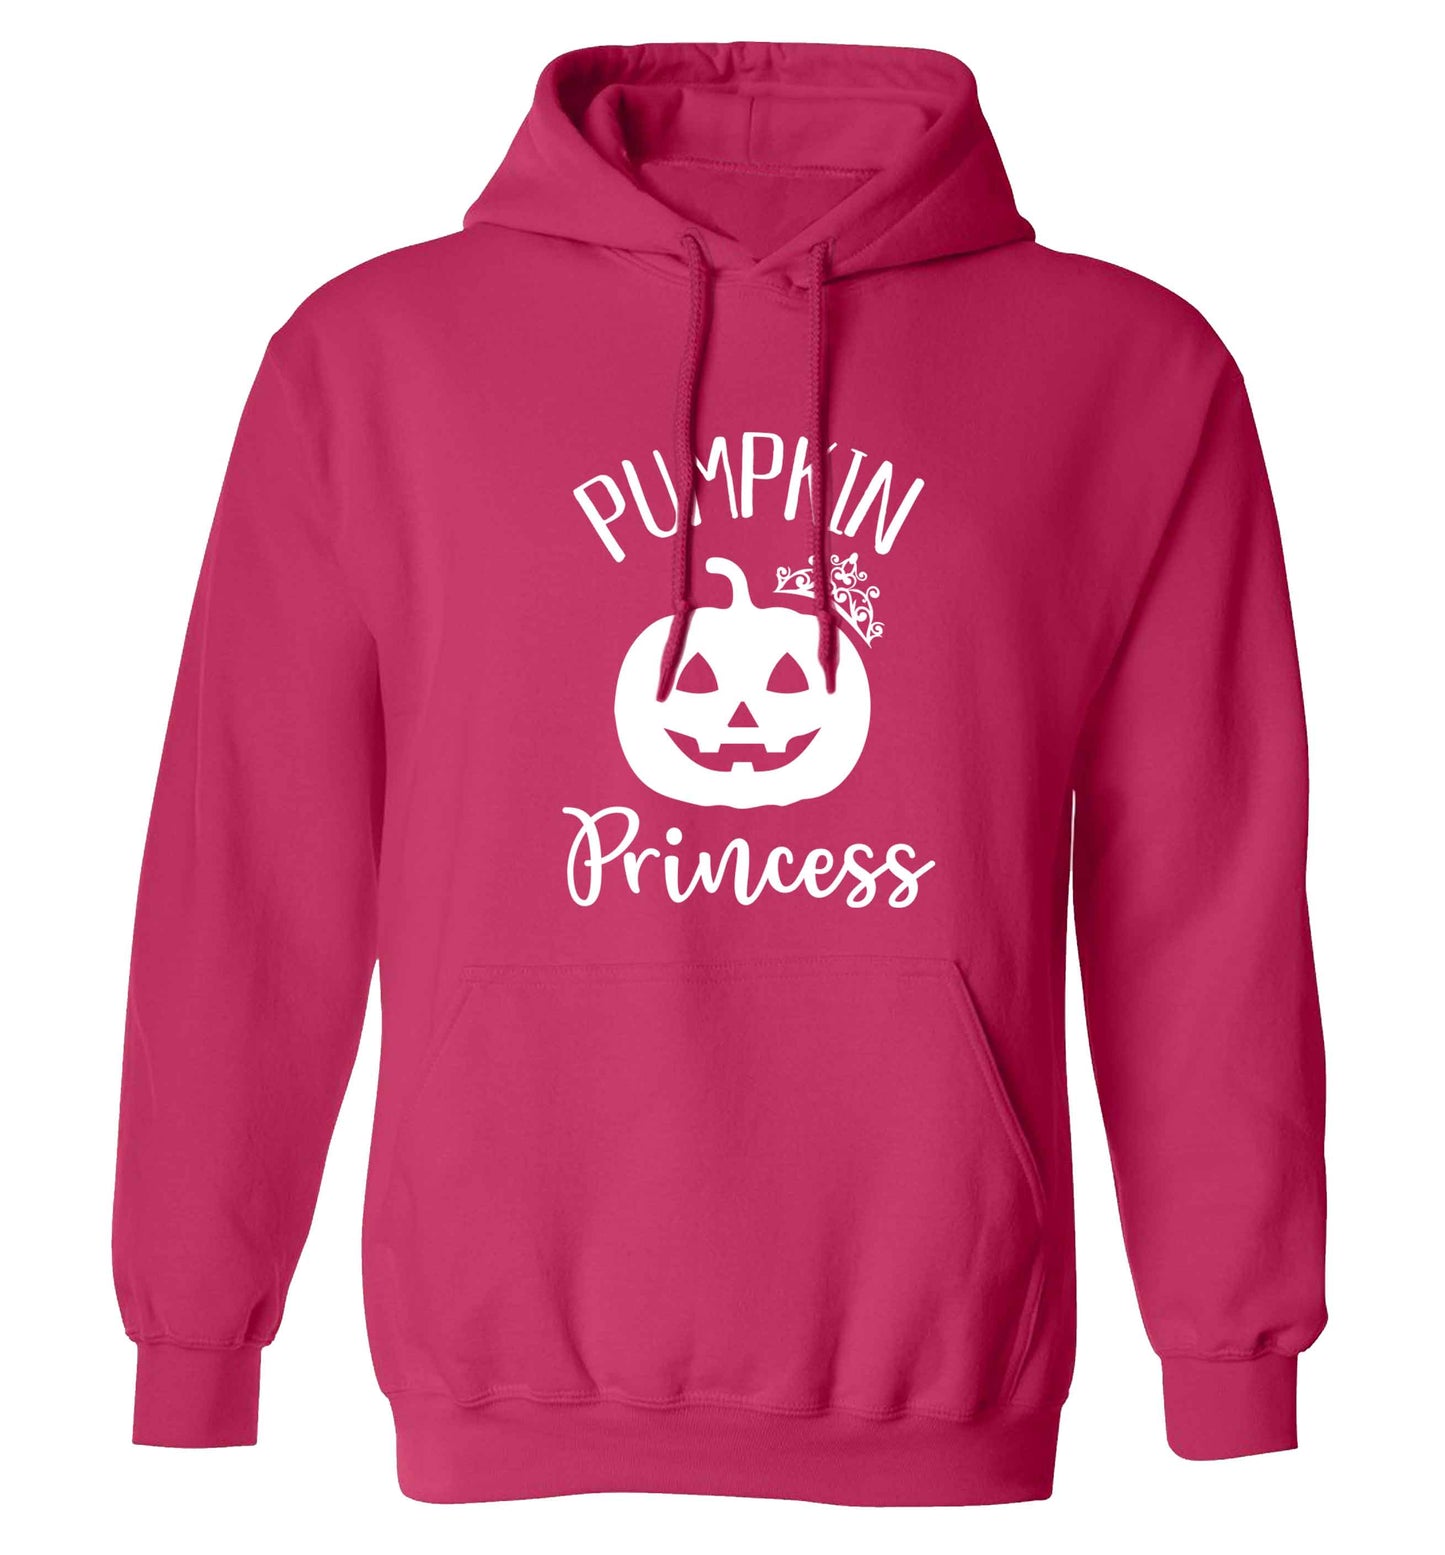 Happiness Pumpkin Spice adults unisex pink hoodie 2XL